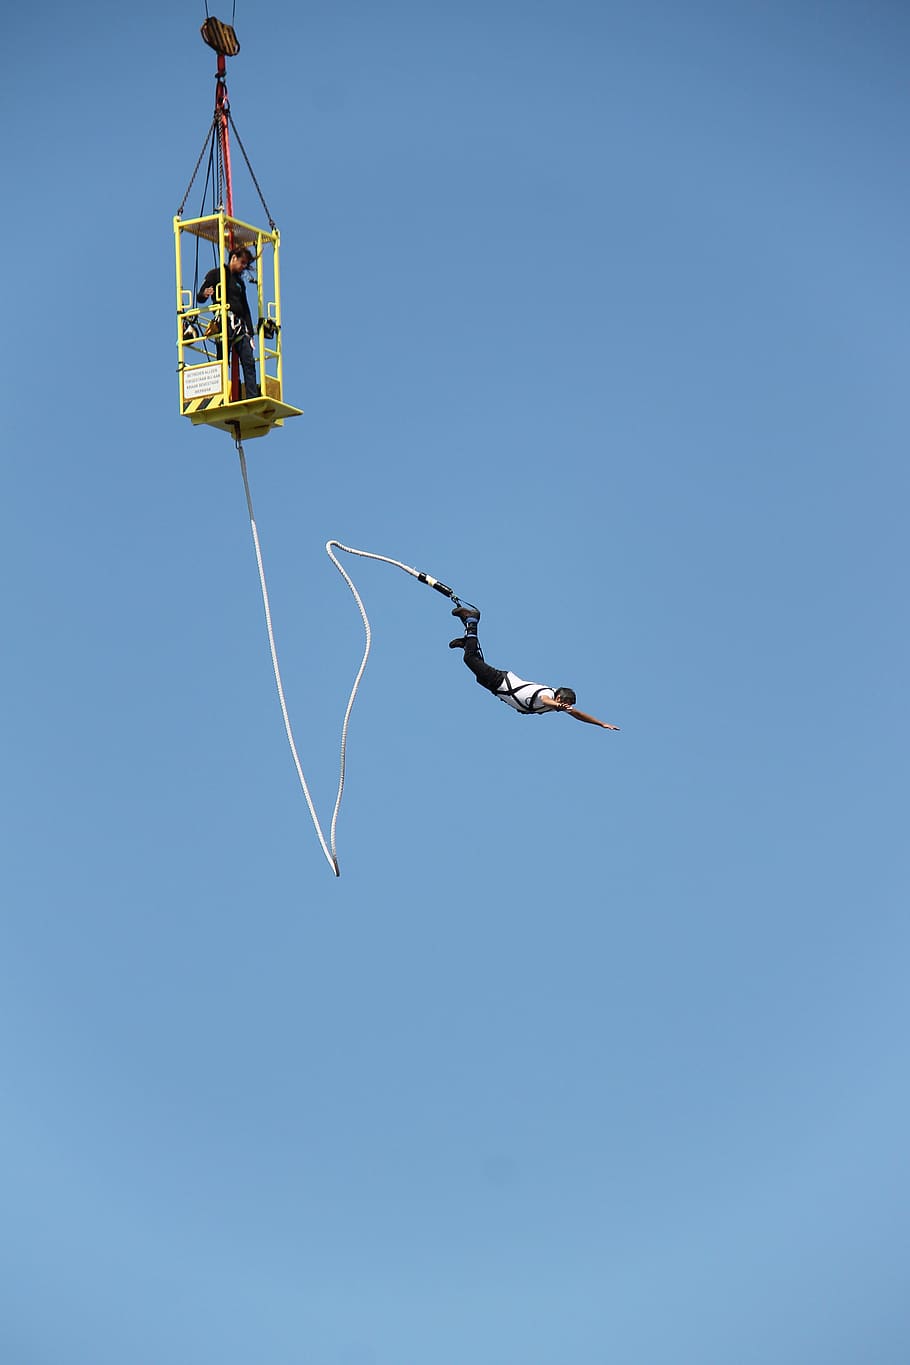 bungee, fall, jump, fun, sport, rope, sky, low angle view, flying, blue